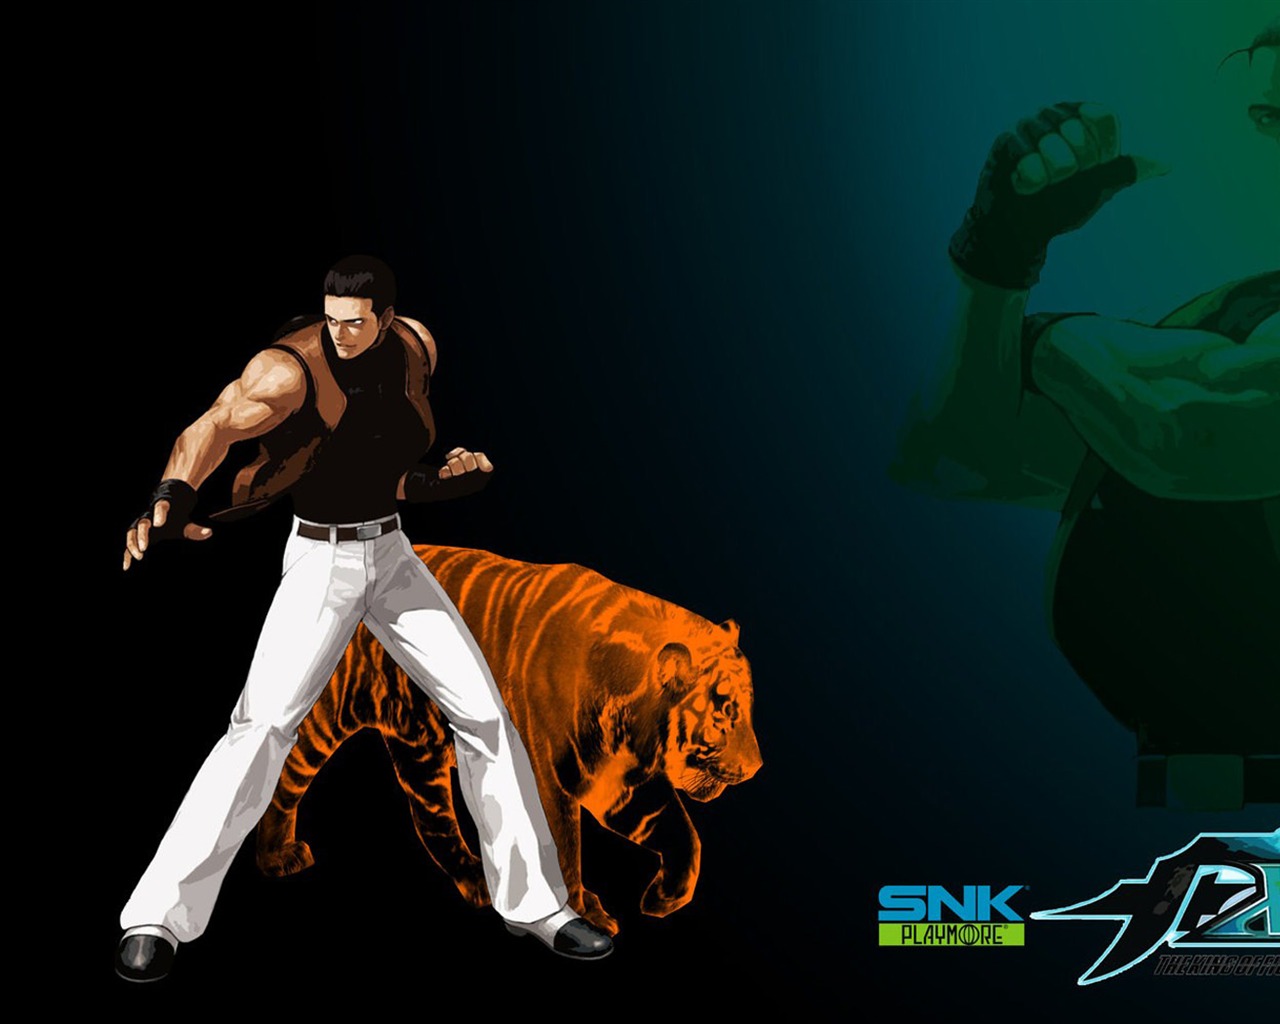 Le roi de wallpapers Fighters XIII #17 - 1280x1024